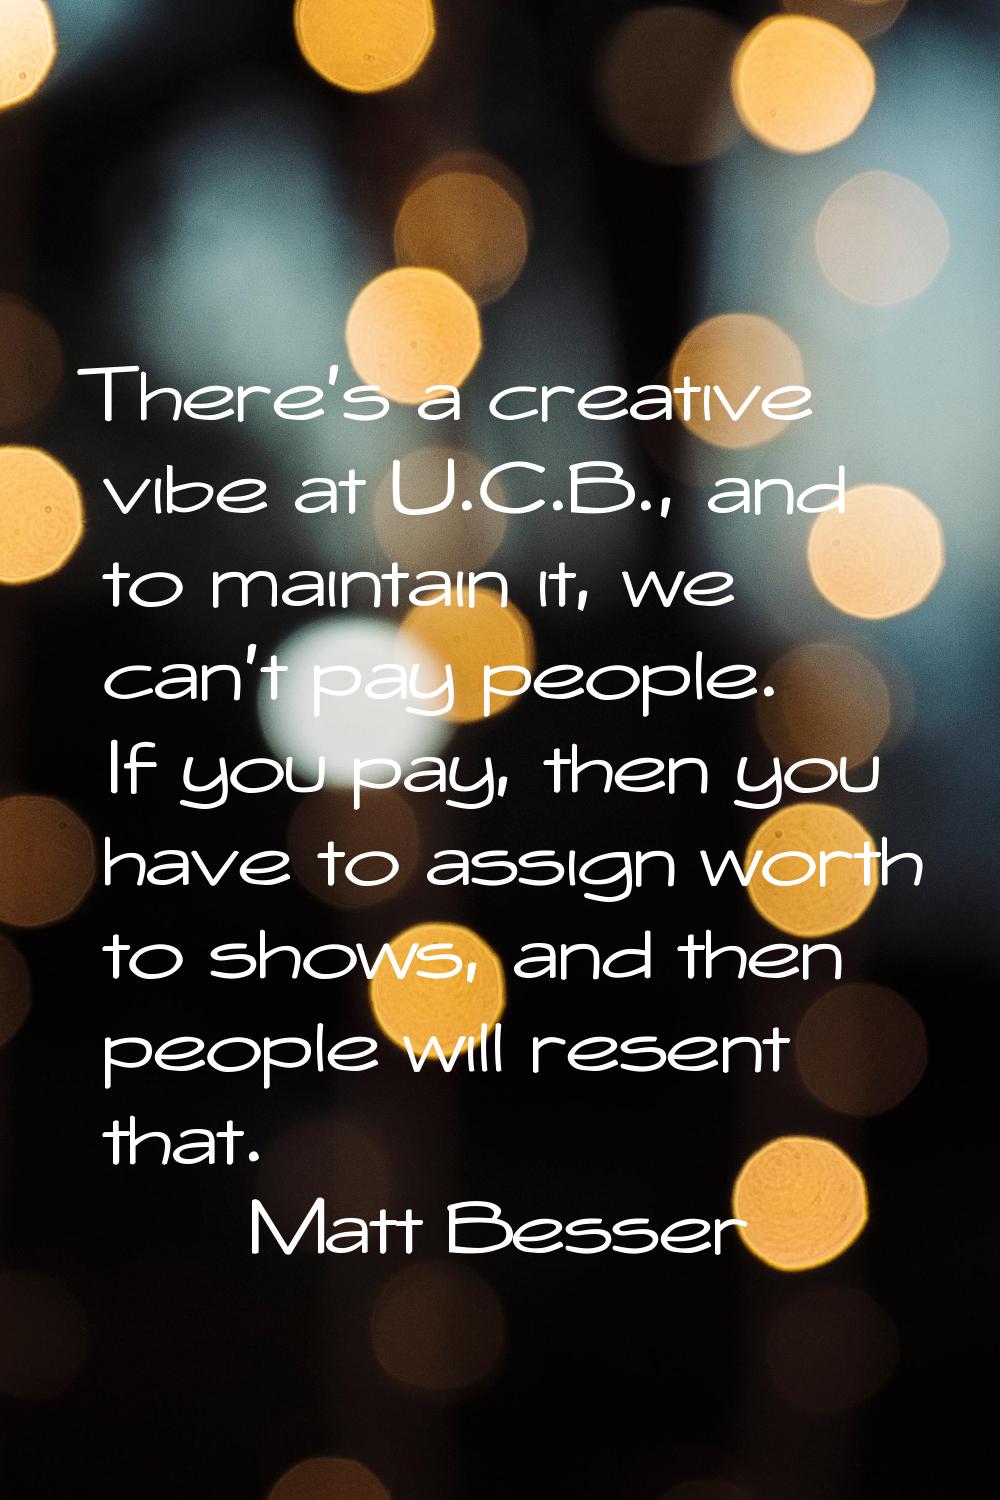 There's a creative vibe at U.C.B., and to maintain it, we can't pay people. If you pay, then you ha